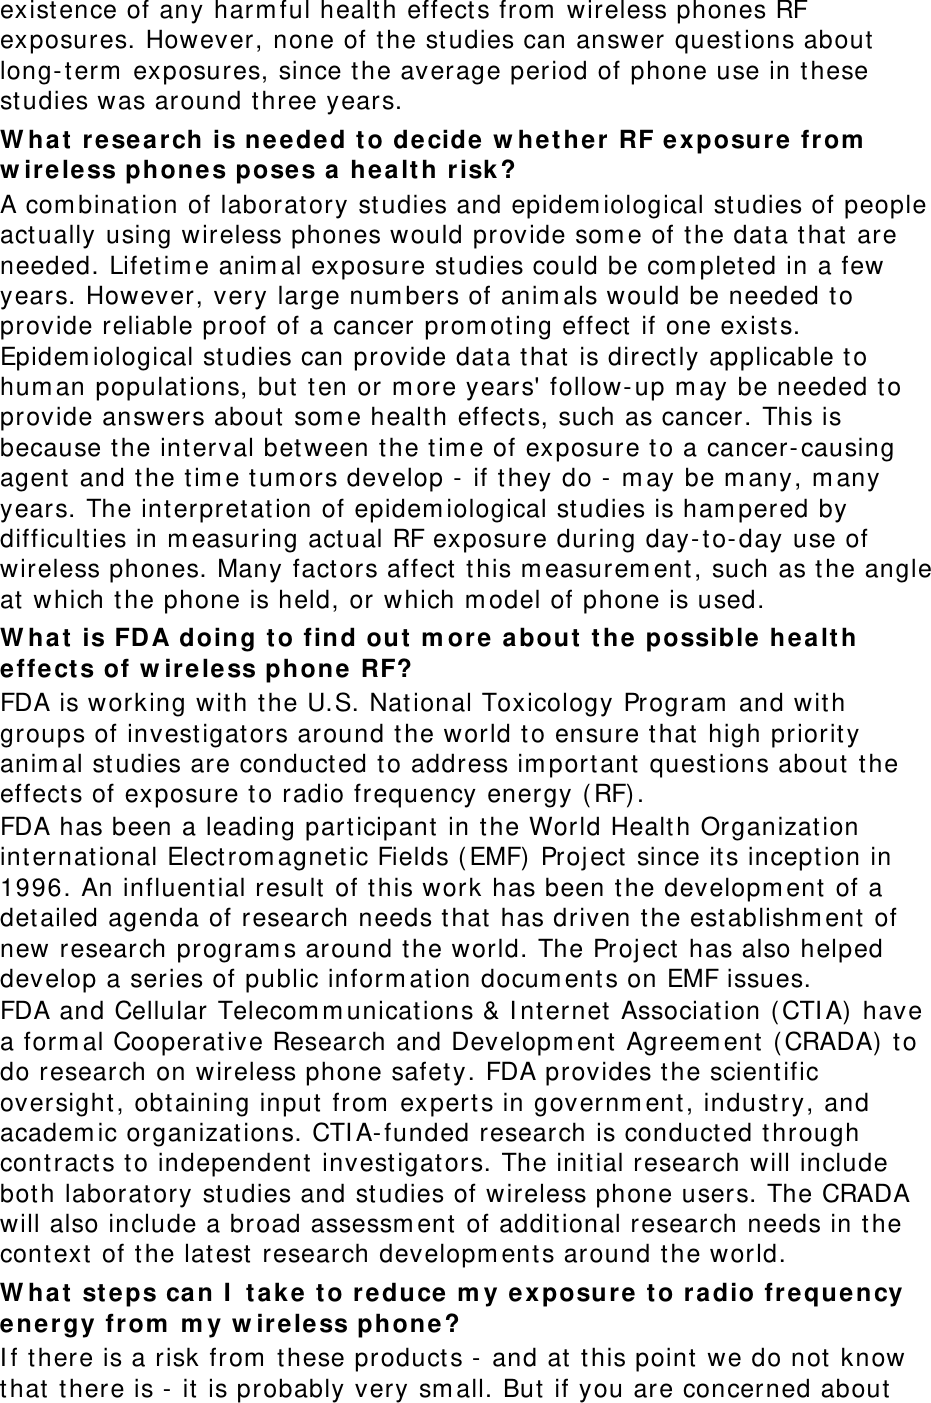 existence of any harm ful healt h effect s from  wireless phones RF exposures. However, none of t he studies can answer questions about  long- t erm  exposures, since the average period of phone use in these studies was around t hree years. W ha t  r esear ch is nee ded t o de cide w het he r RF ex posure fr om  w ir eless phone s pose s a  he a lt h risk? A com binat ion of laboratory studies and epidem iological studies of people actually using wireless phones would provide som e of t he dat a that are needed. Lifetim e anim al exposure studies could be com plet ed in a few years. However, very large num bers of anim als would be needed t o provide reliable proof of a cancer prom ot ing effect if one exists. Epidem iological studies can provide dat a that is directly applicable to hum an populations, but t en or m ore years&apos; follow- up m ay be needed to provide answers about  som e healt h effects, such as cancer. This is because the interval bet ween the tim e of exposure t o a cancer- causing agent and t he t im e t um ors develop -  if t hey do -  m ay be m any, m any years. The int erpretat ion of epidem iological studies is ham pered by difficult ies in m easuring actual RF exposure during day- to- day use of wireless phones. Many factors affect  this m easurem ent , such as t he angle at  which t he phone is held, or which m odel of phone is used. W ha t  is FDA doing t o find out  m or e  about  t he possible hea lt h effe ct s of w ire less ph one RF? FDA is working with the U.S. Nat ional Toxicology Program  and with groups of investigat ors around t he world t o ensure that high priorit y anim al studies are conducted t o address im port ant  questions about  t he effect s of exposure t o radio frequency energy ( RF) . FDA has been a leading part icipant in t he World Health Organization internat ional Elect rom agnet ic Fields (EMF)  Proj ect since its inception in 1996. An influent ial result of t his work has been t he developm ent of a detailed agenda of research needs that  has driven t he est ablishm ent  of new research program s around the world. The Proj ect has also helped develop a series of public inform at ion docum ent s on EMF issues. FDA and Cellular Telecom m unicat ions &amp; I nt ernet Association ( CTI A) have a form al Cooperat ive Research and Developm ent  Agreem ent  ( CRADA)  t o do research on wireless phone safet y. FDA provides t he scient ific oversight , obt aining input  from  expert s in governm ent , industry, and academ ic organizat ions. CTI A- funded research is conduct ed t hrough cont ract s t o independent  investigators. The init ial research will include bot h laborat ory studies and studies of wireless phone users. The CRADA will also include a broad assessm ent of additional research needs in t he cont ext  of t he latest  research developm ents around the world. W ha t  st eps can I  t a k e  t o re duce  m y ex posure t o r a dio frequency energy fr om  m y w ireless phone? I f t here is a risk from  these products -  and at  this point  we do not know that there is -  it  is probably very sm all. But  if you are concerned about  